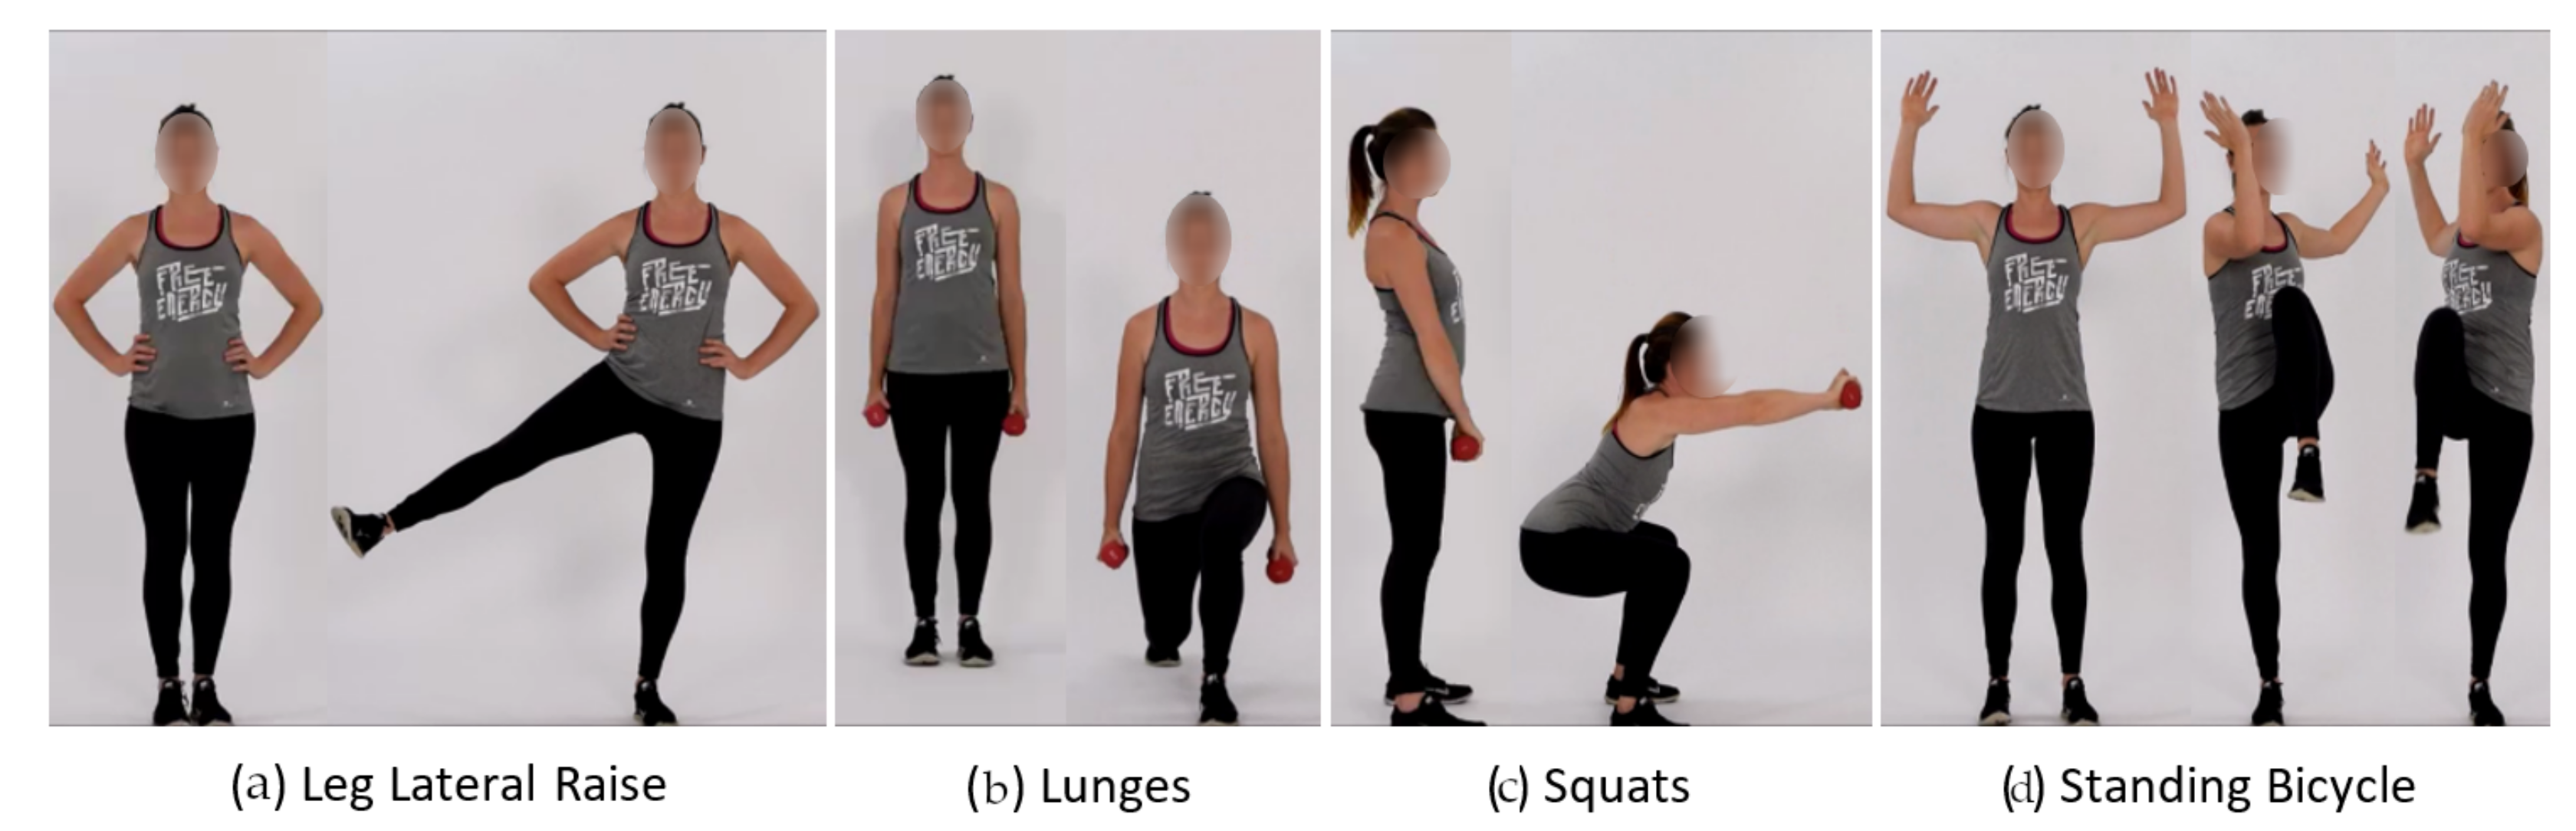 Sensors Free Full Text Recognition And Repetition Counting For Local Muscular Endurance Exercises In Exercise Based Rehabilitation A Comparative Study Using Artificial Intelligence Models Html